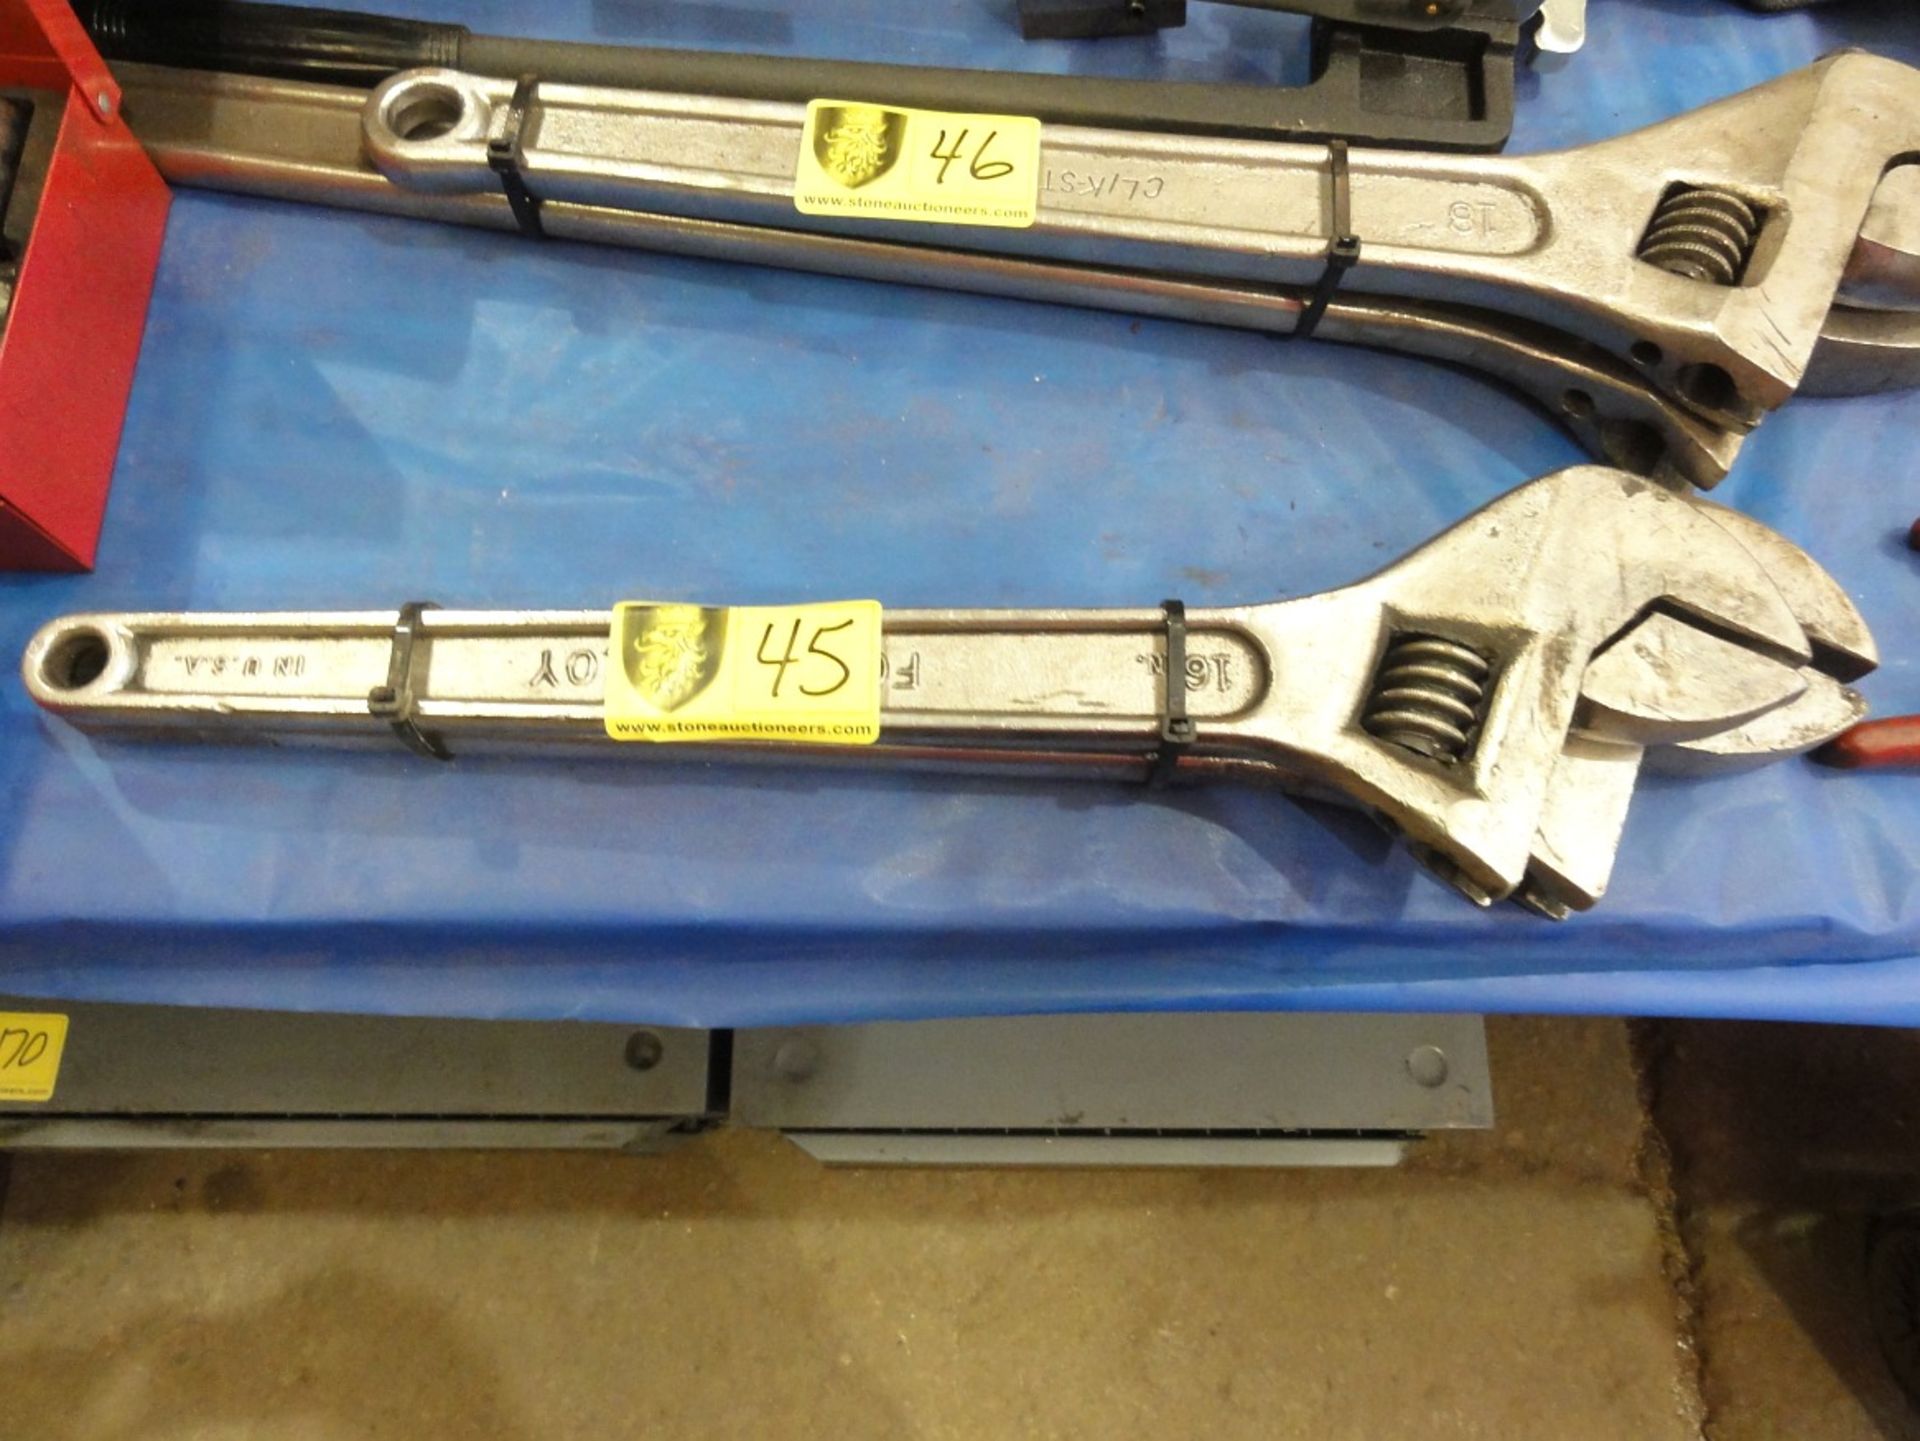 16" & 17" Adjustable Wrenches